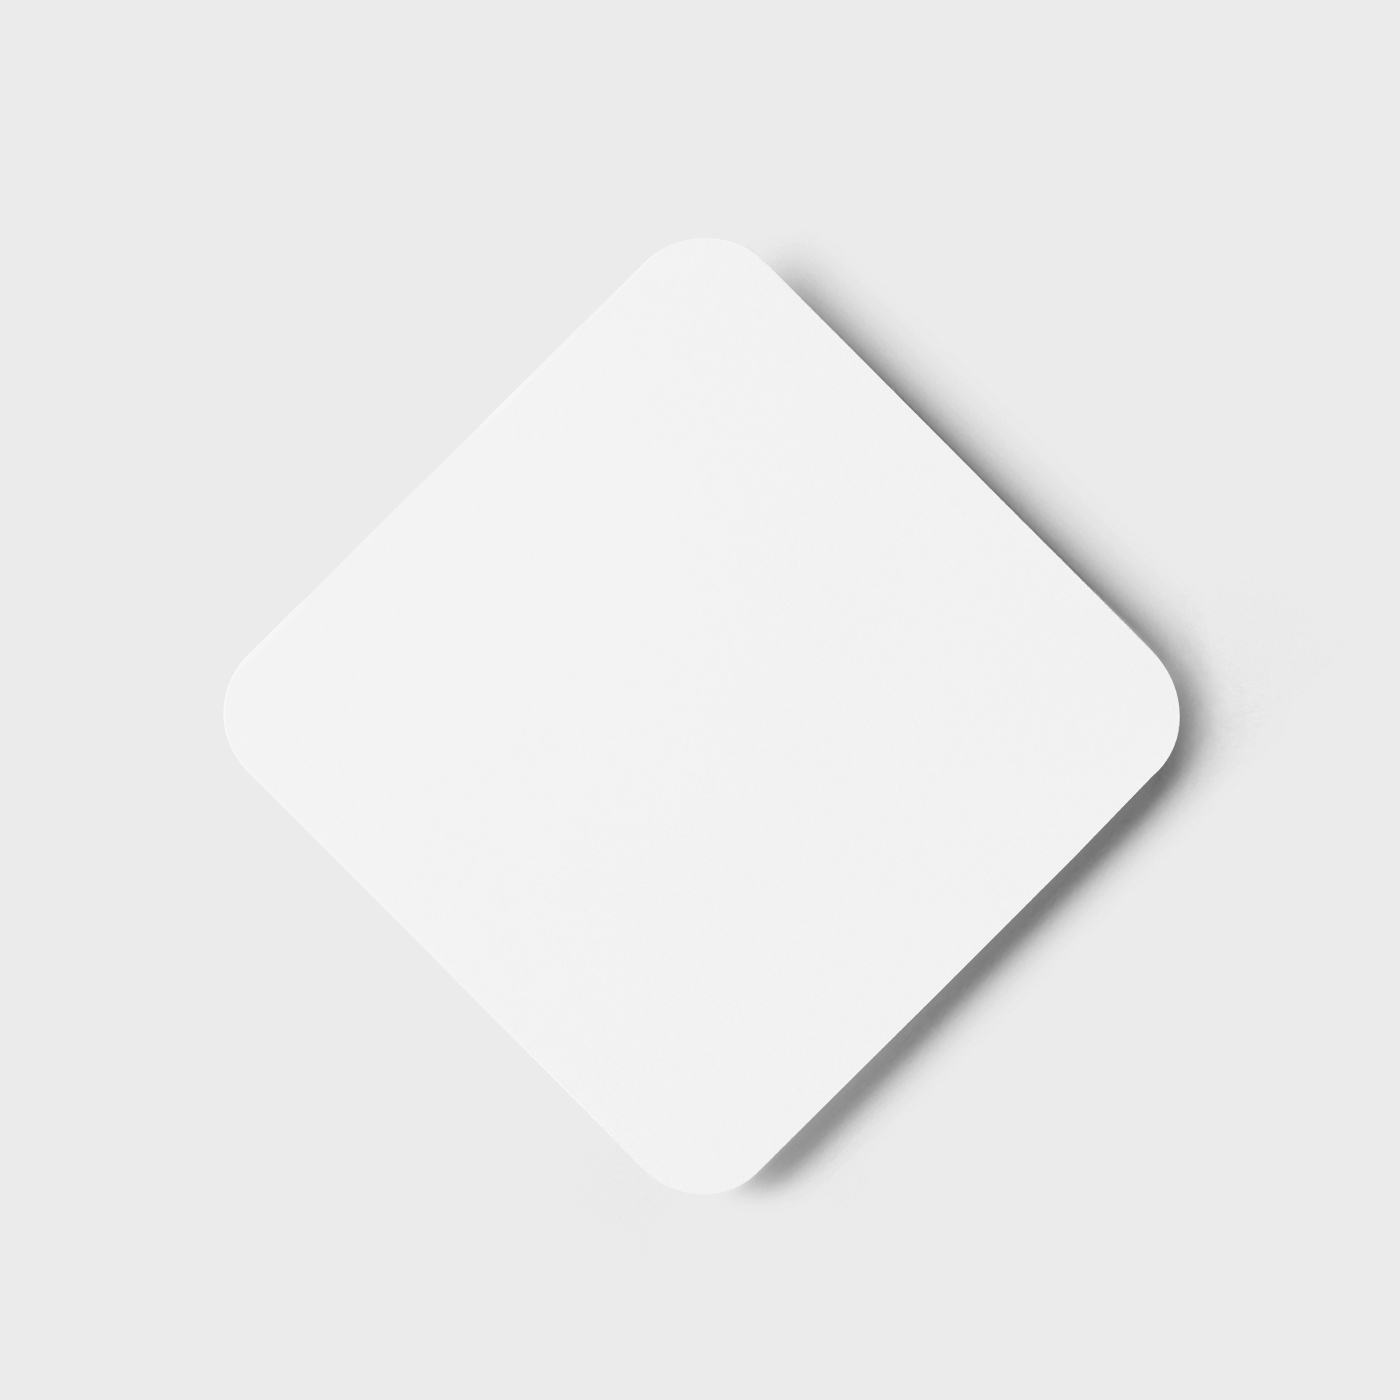 Top View of Square Paper Coaster Mockup FREE PSD